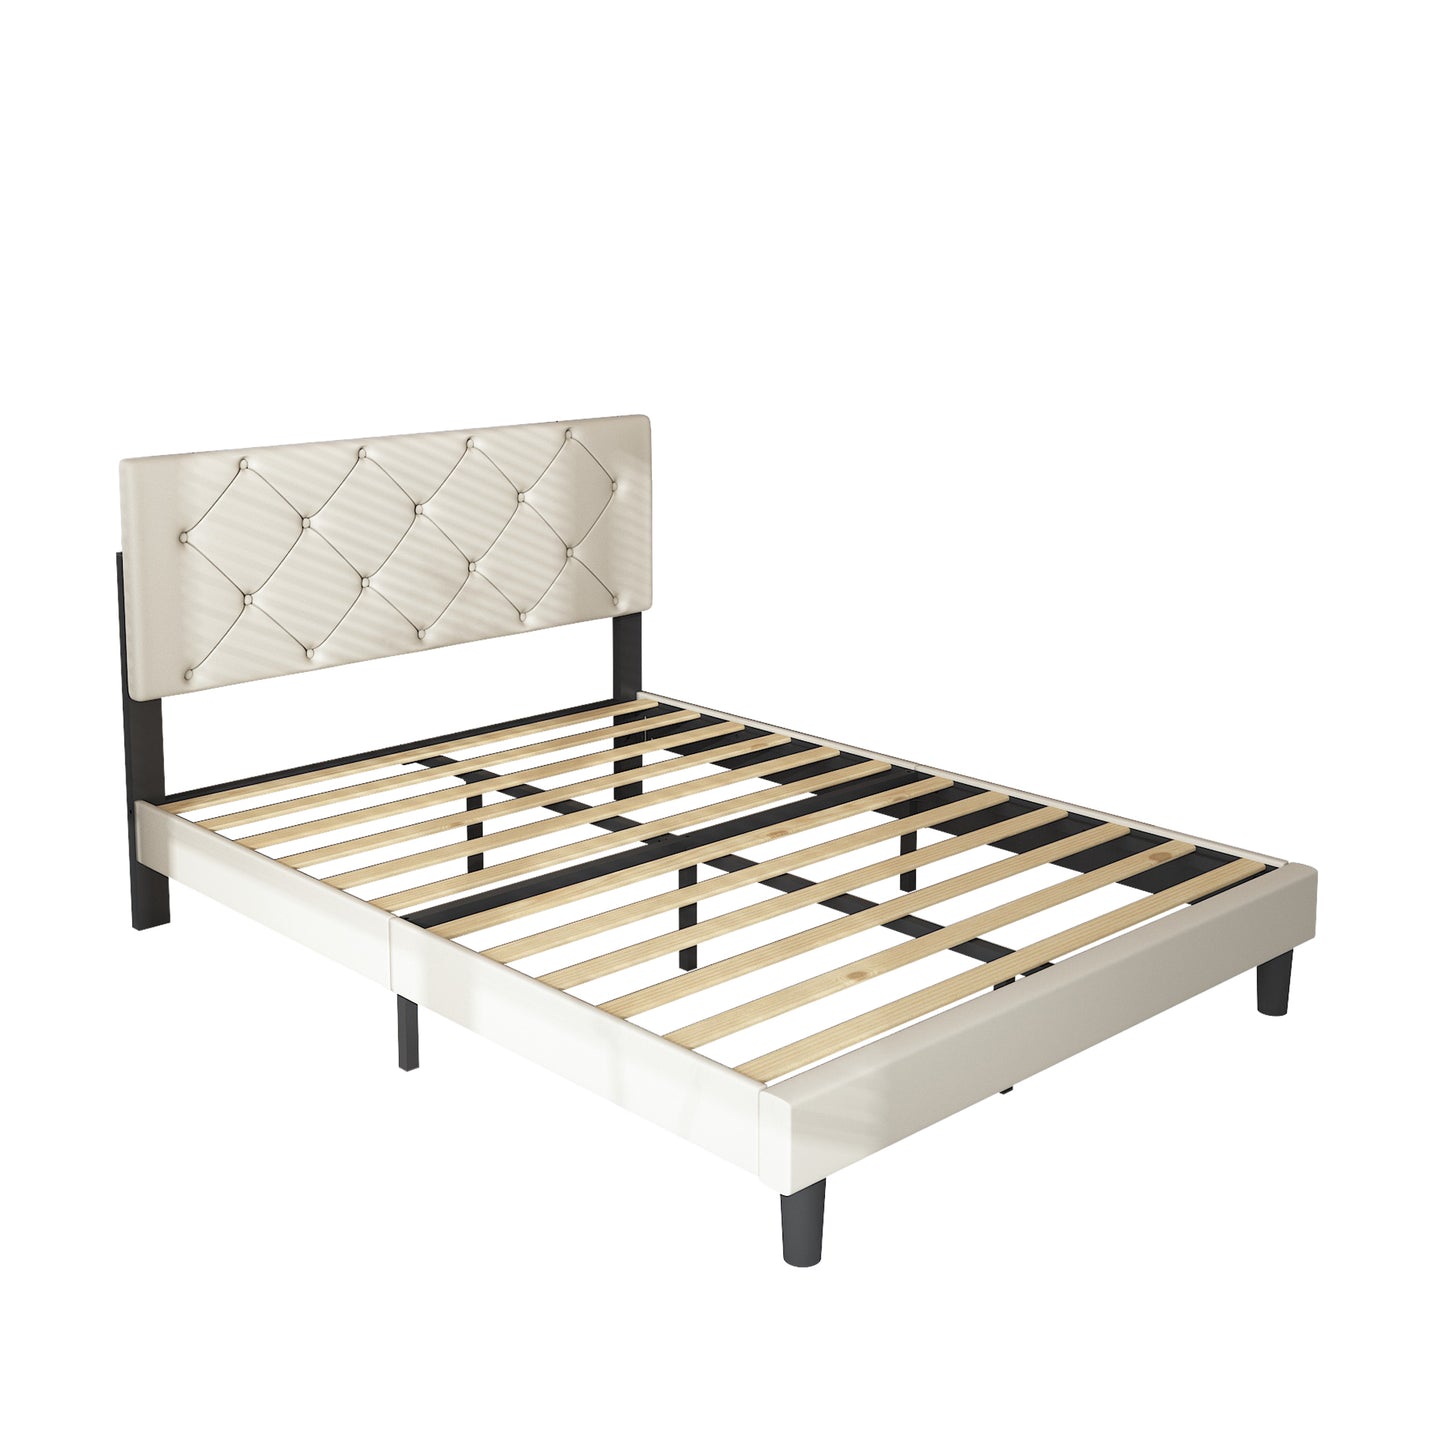 paproos Full Bed Frame, Upholstered Linen Fabric Platform Bed with Headboard, Strong Wooden Slats Support, No Box Spring Needed, Beige